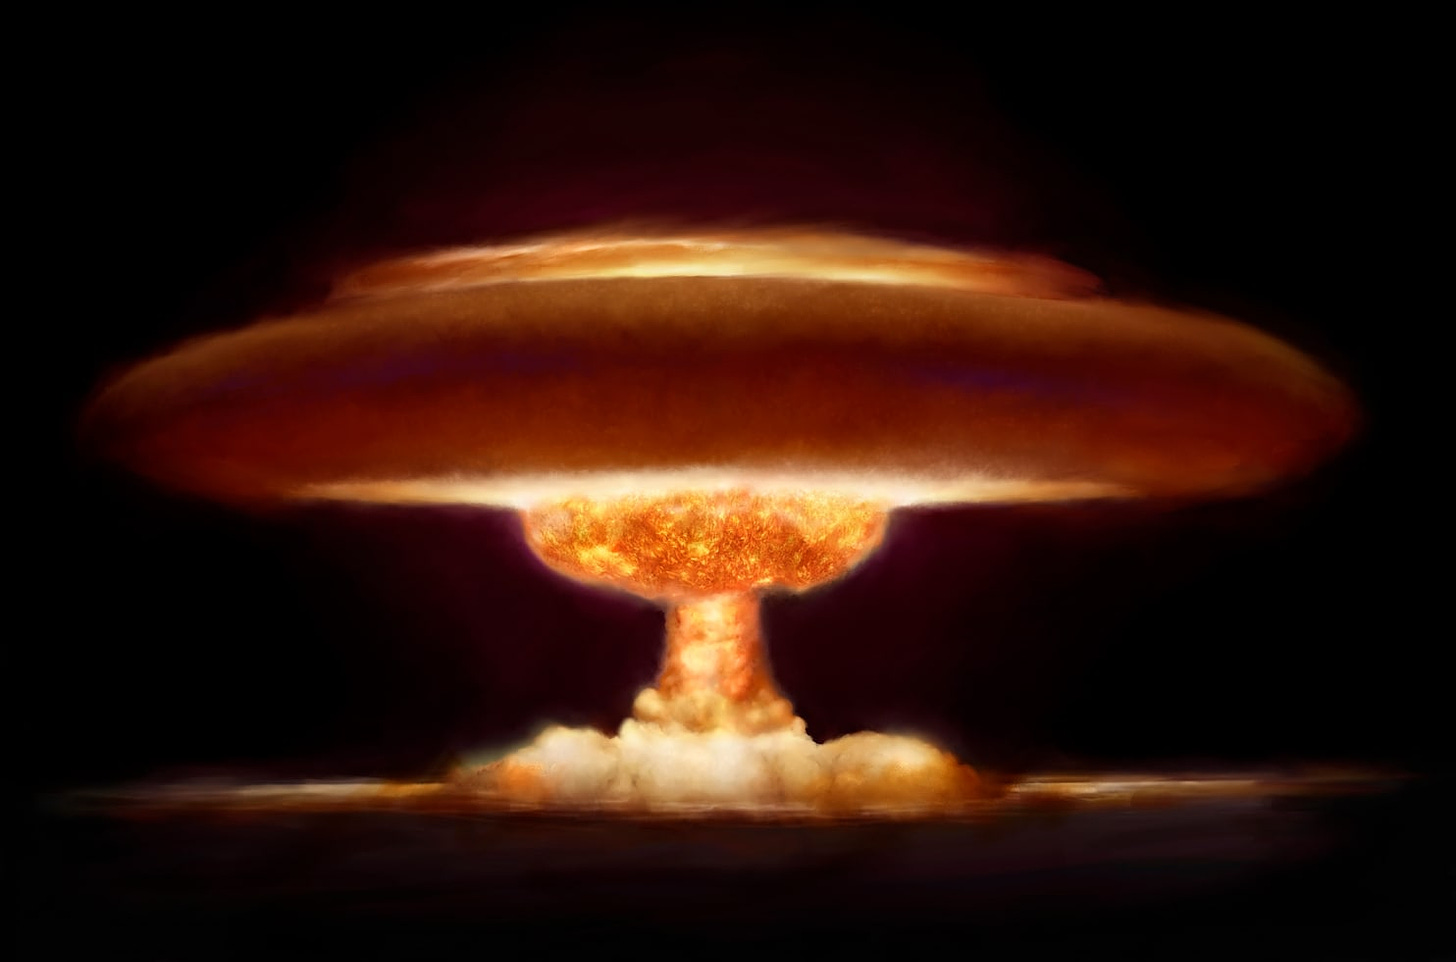 Study: How to survive a nuclear explosion - The Washington Post